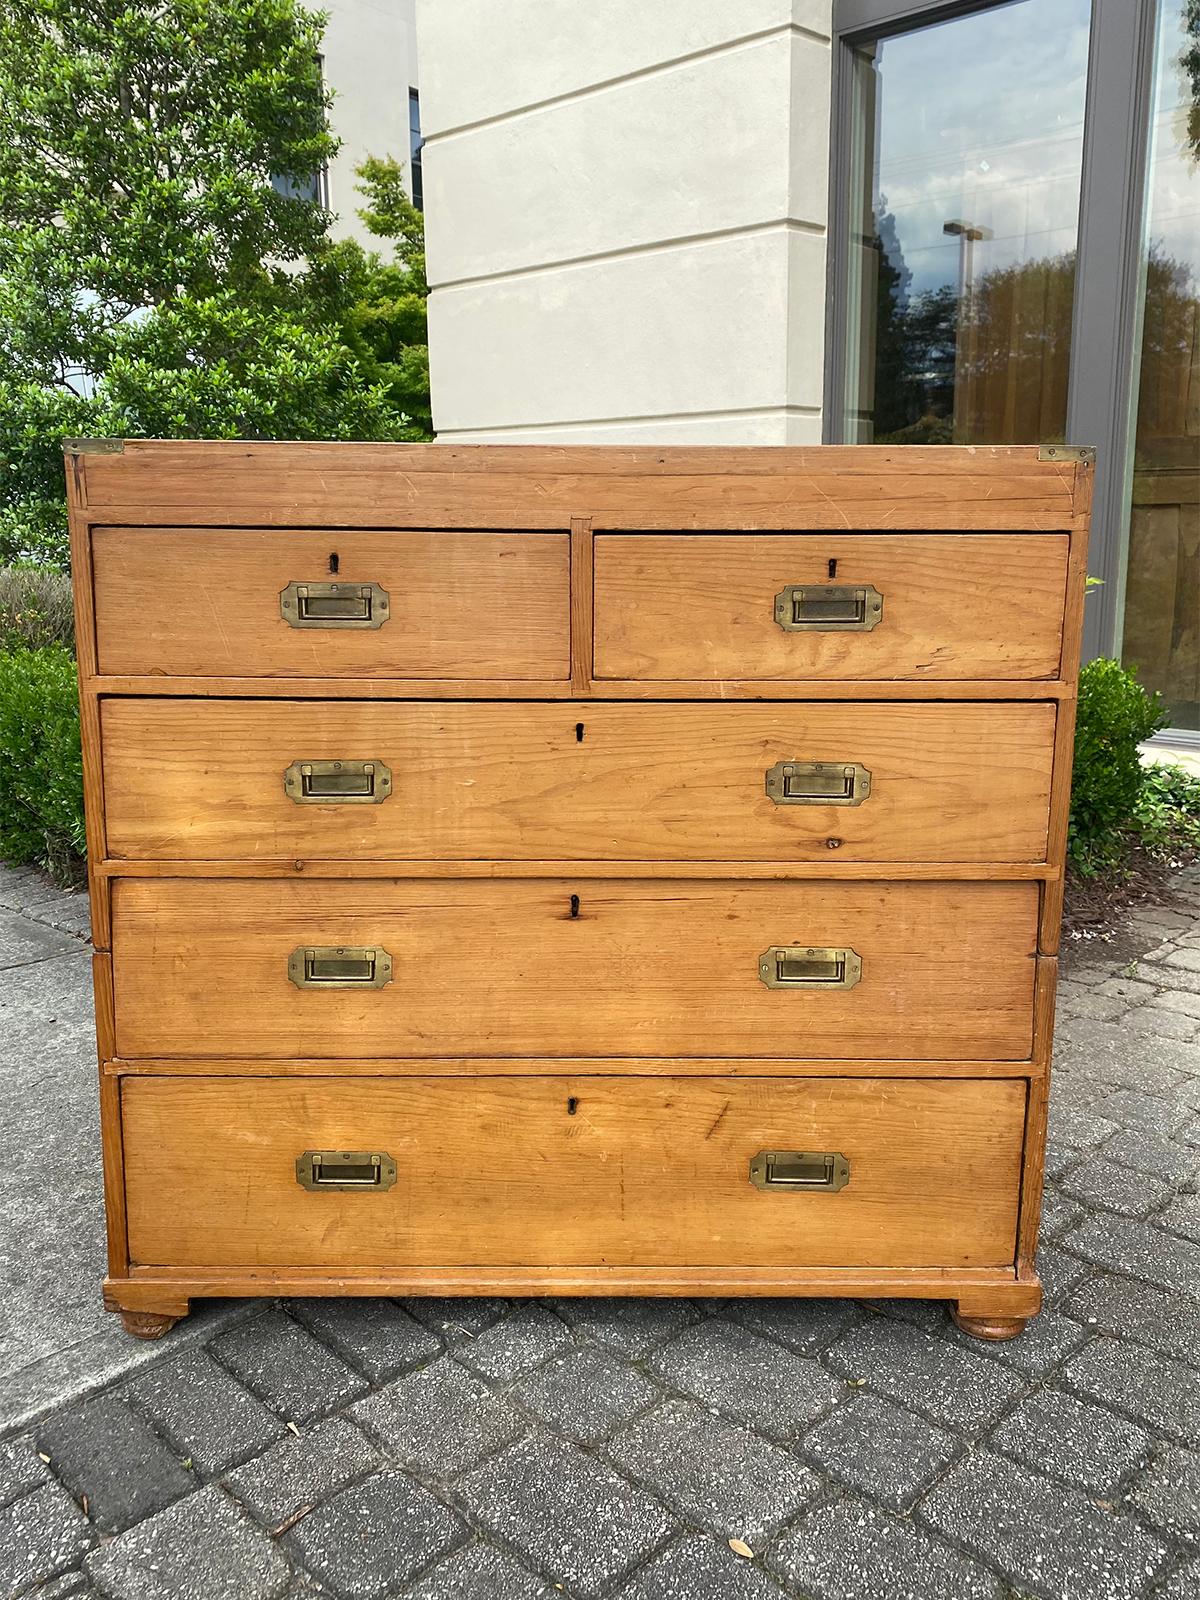 Circa 1880s-1890s English Pine Campaign chest of drawers
Unusual & hard to find form. Comes in two pieces.